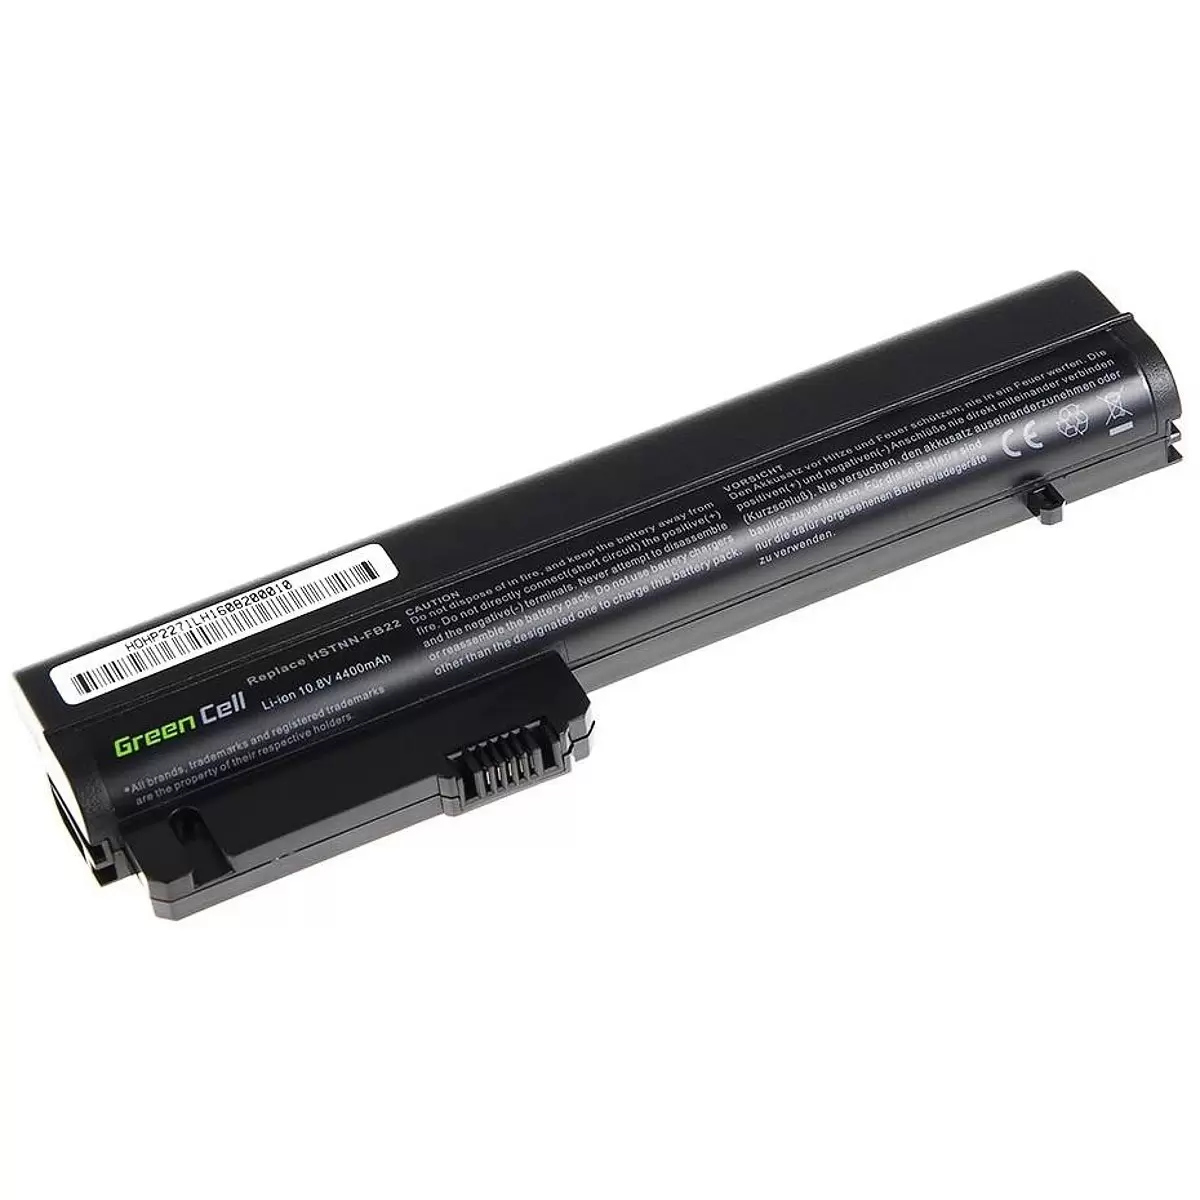 GREENCELL HP49 Battery for HP